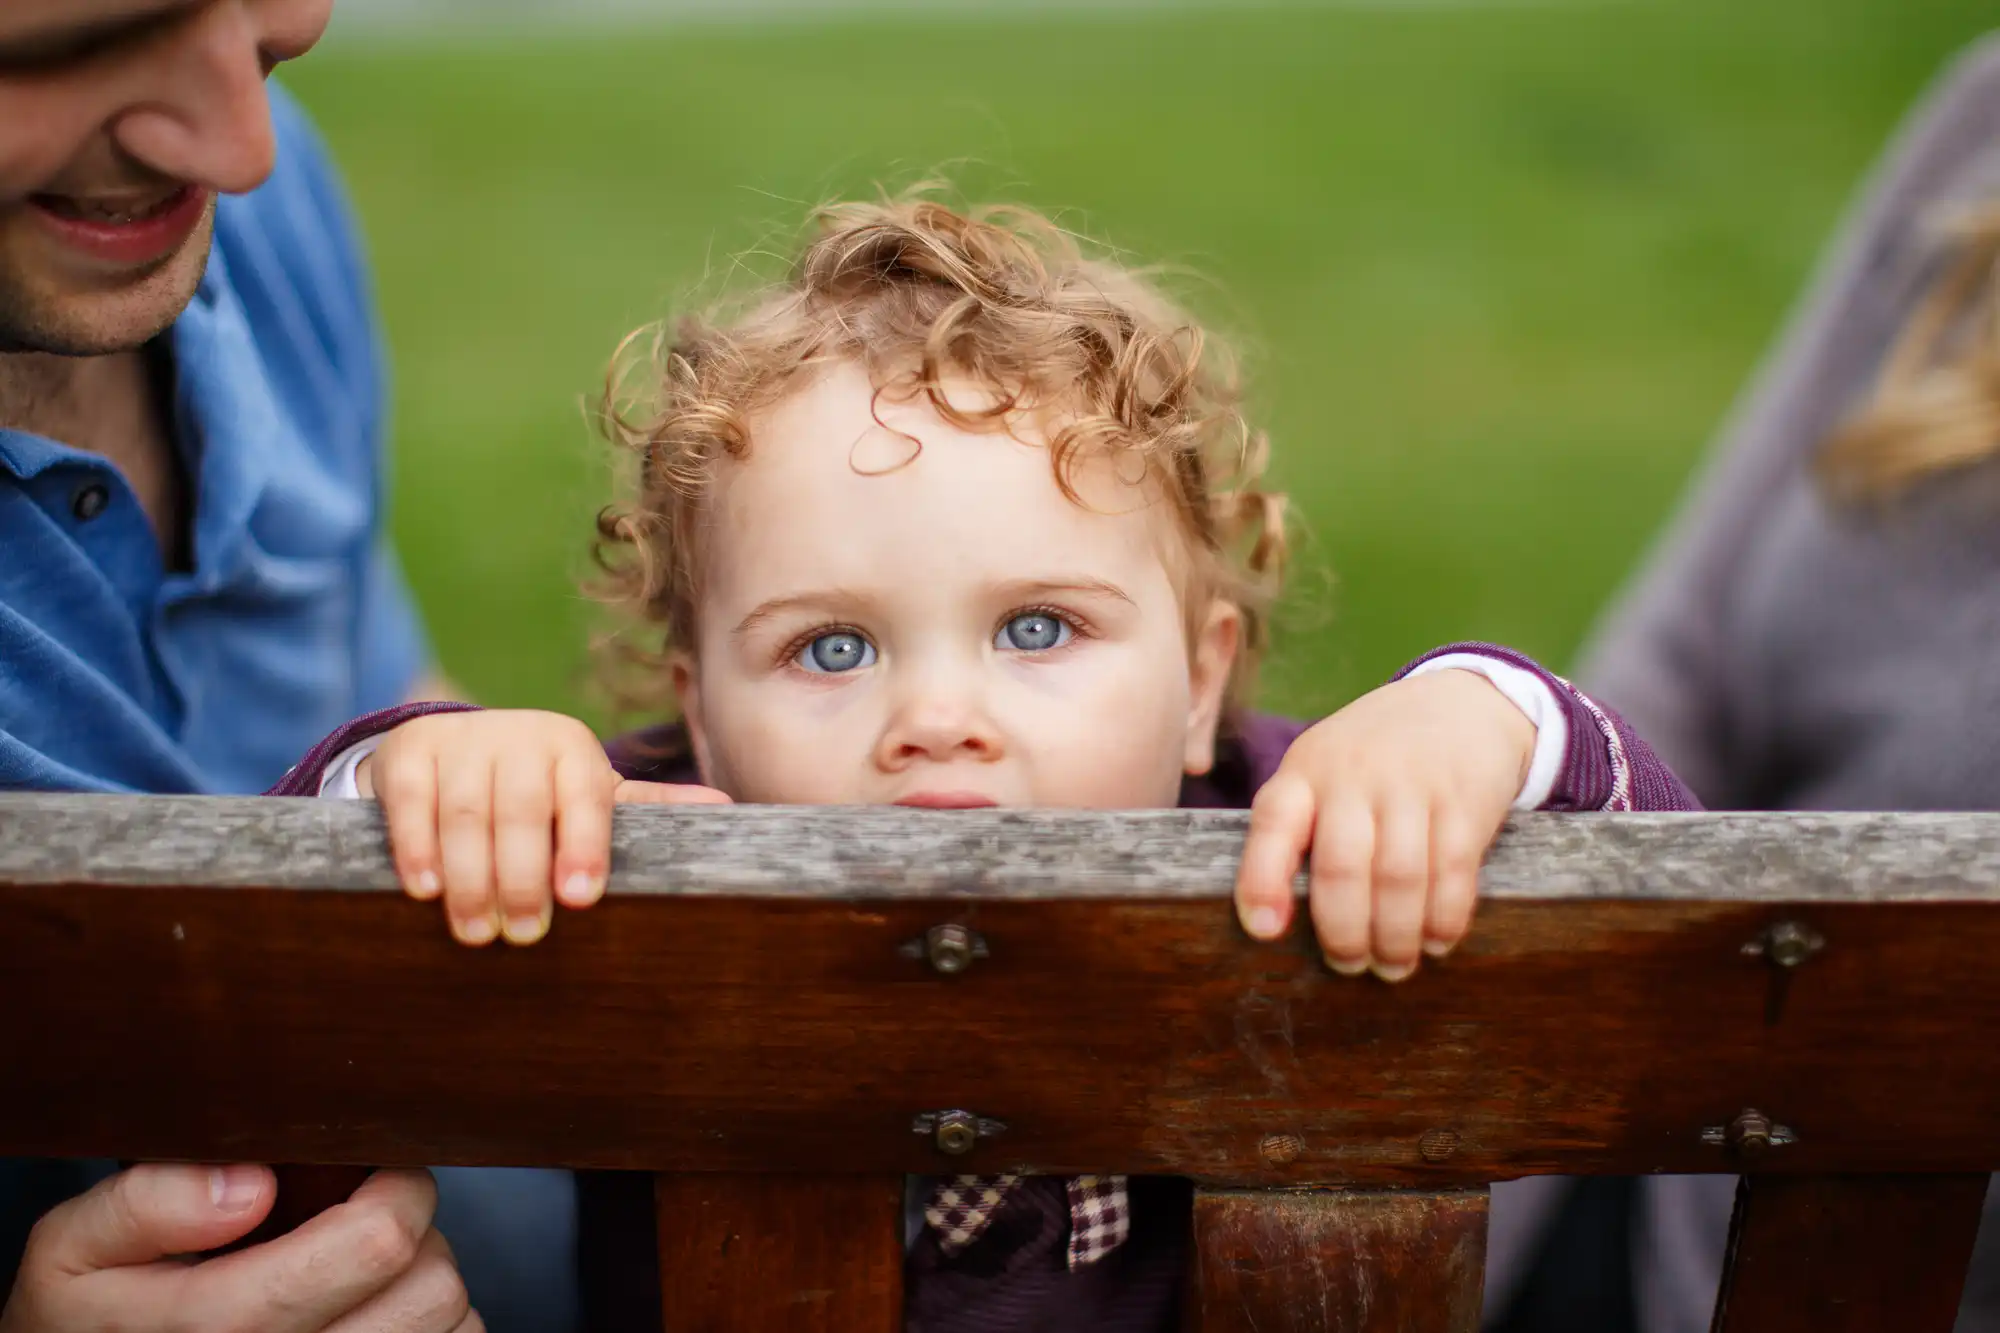 Toddler with curly hair peering over a wooden fence, flanked by adults, in a park setting.